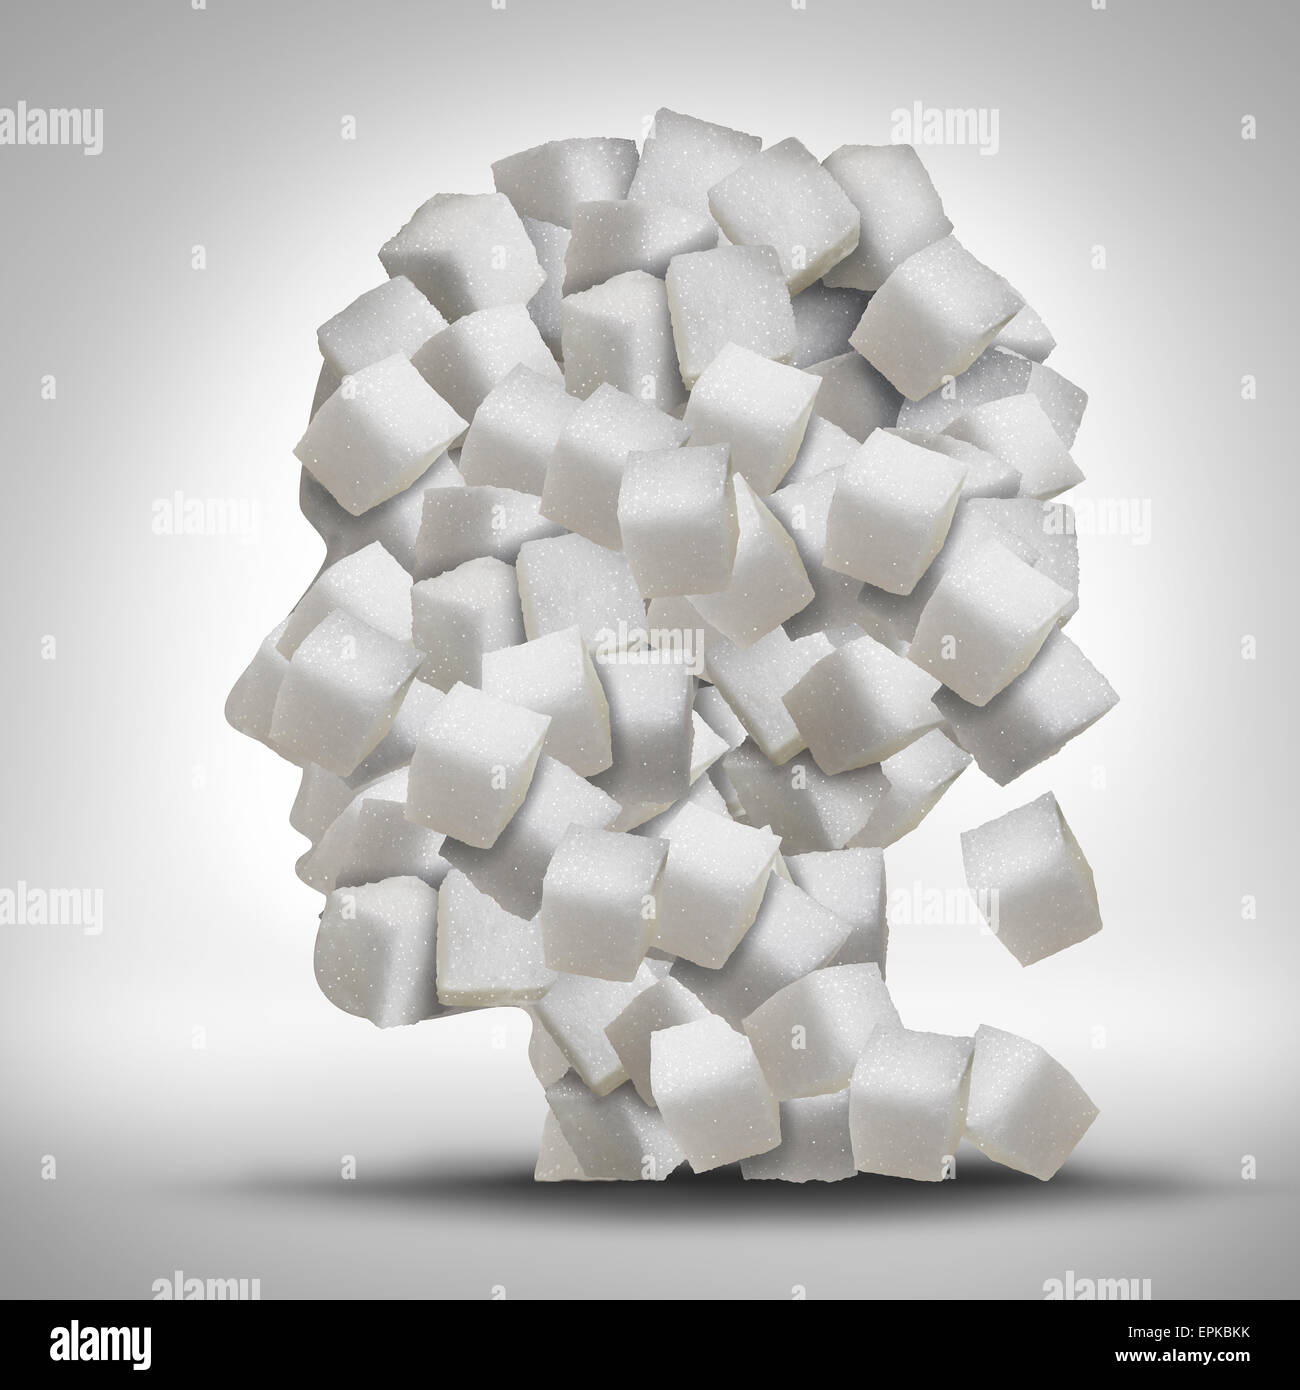 Sugar addiction concept as a human head made of white granulated refined sweet cubes as a health care symbol for being addicted Stock Photo